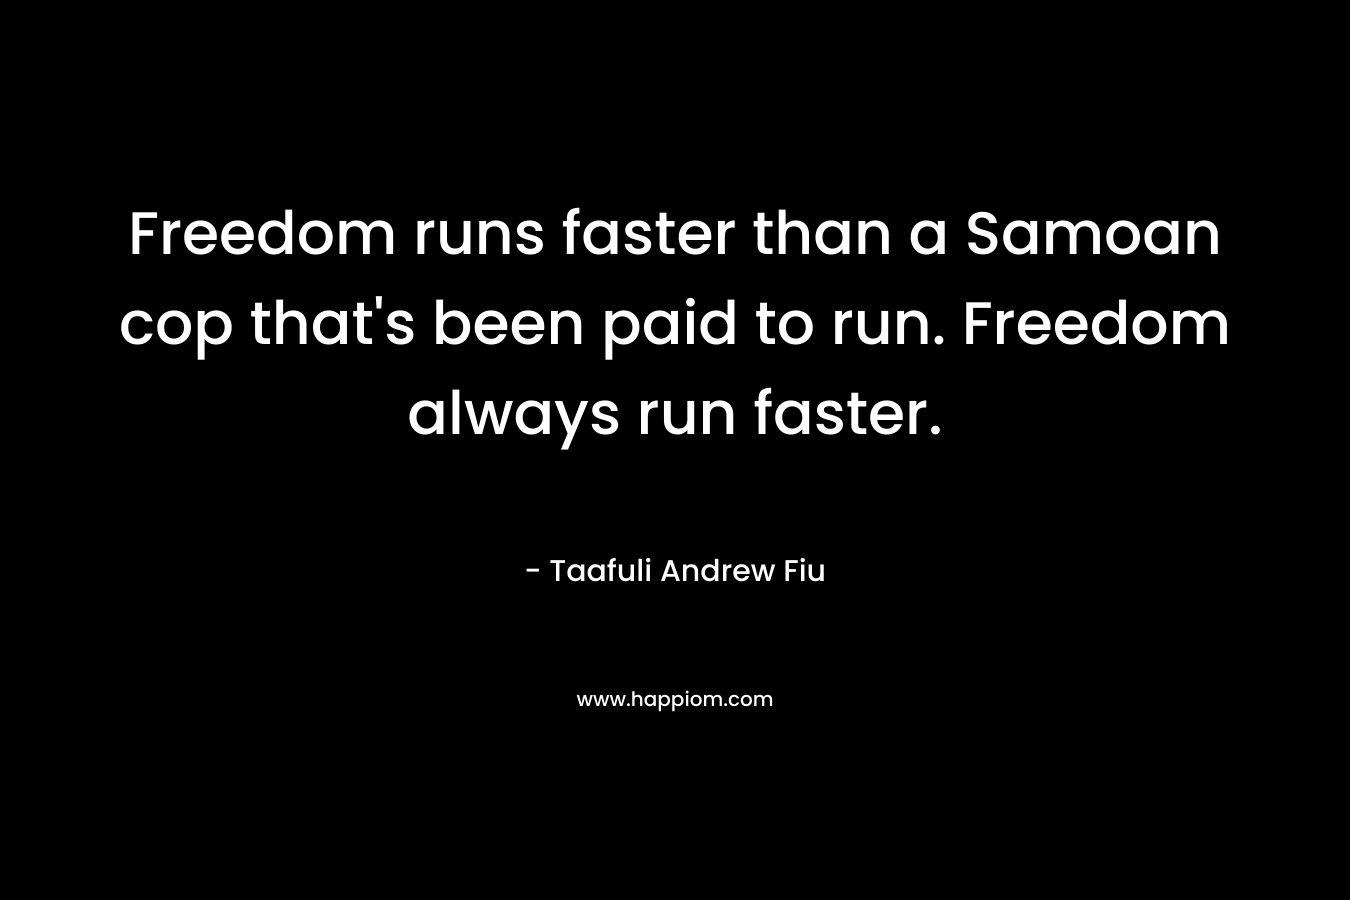 Freedom runs faster than a Samoan cop that’s been paid to run. Freedom always run faster. – Taafuli Andrew Fiu